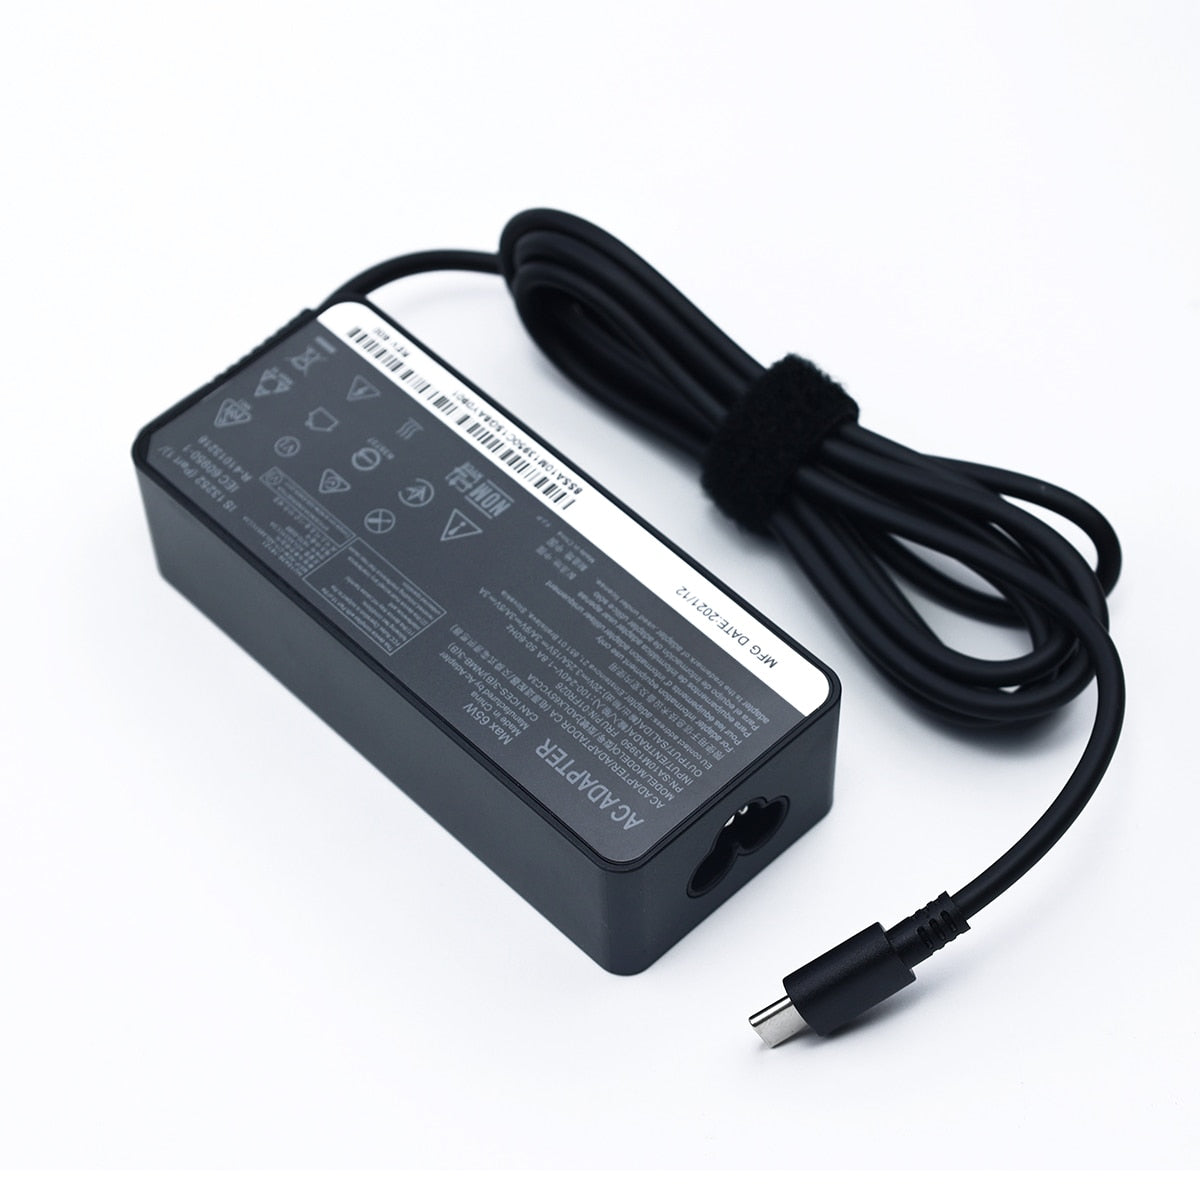 20V 3.25A 65W USB Type-C AC Laptop Power Adapter Charger For Lenovo Thinkpad X1 Carbon Yoga X270 X280 T580 P51 P52s E480 E470 S2